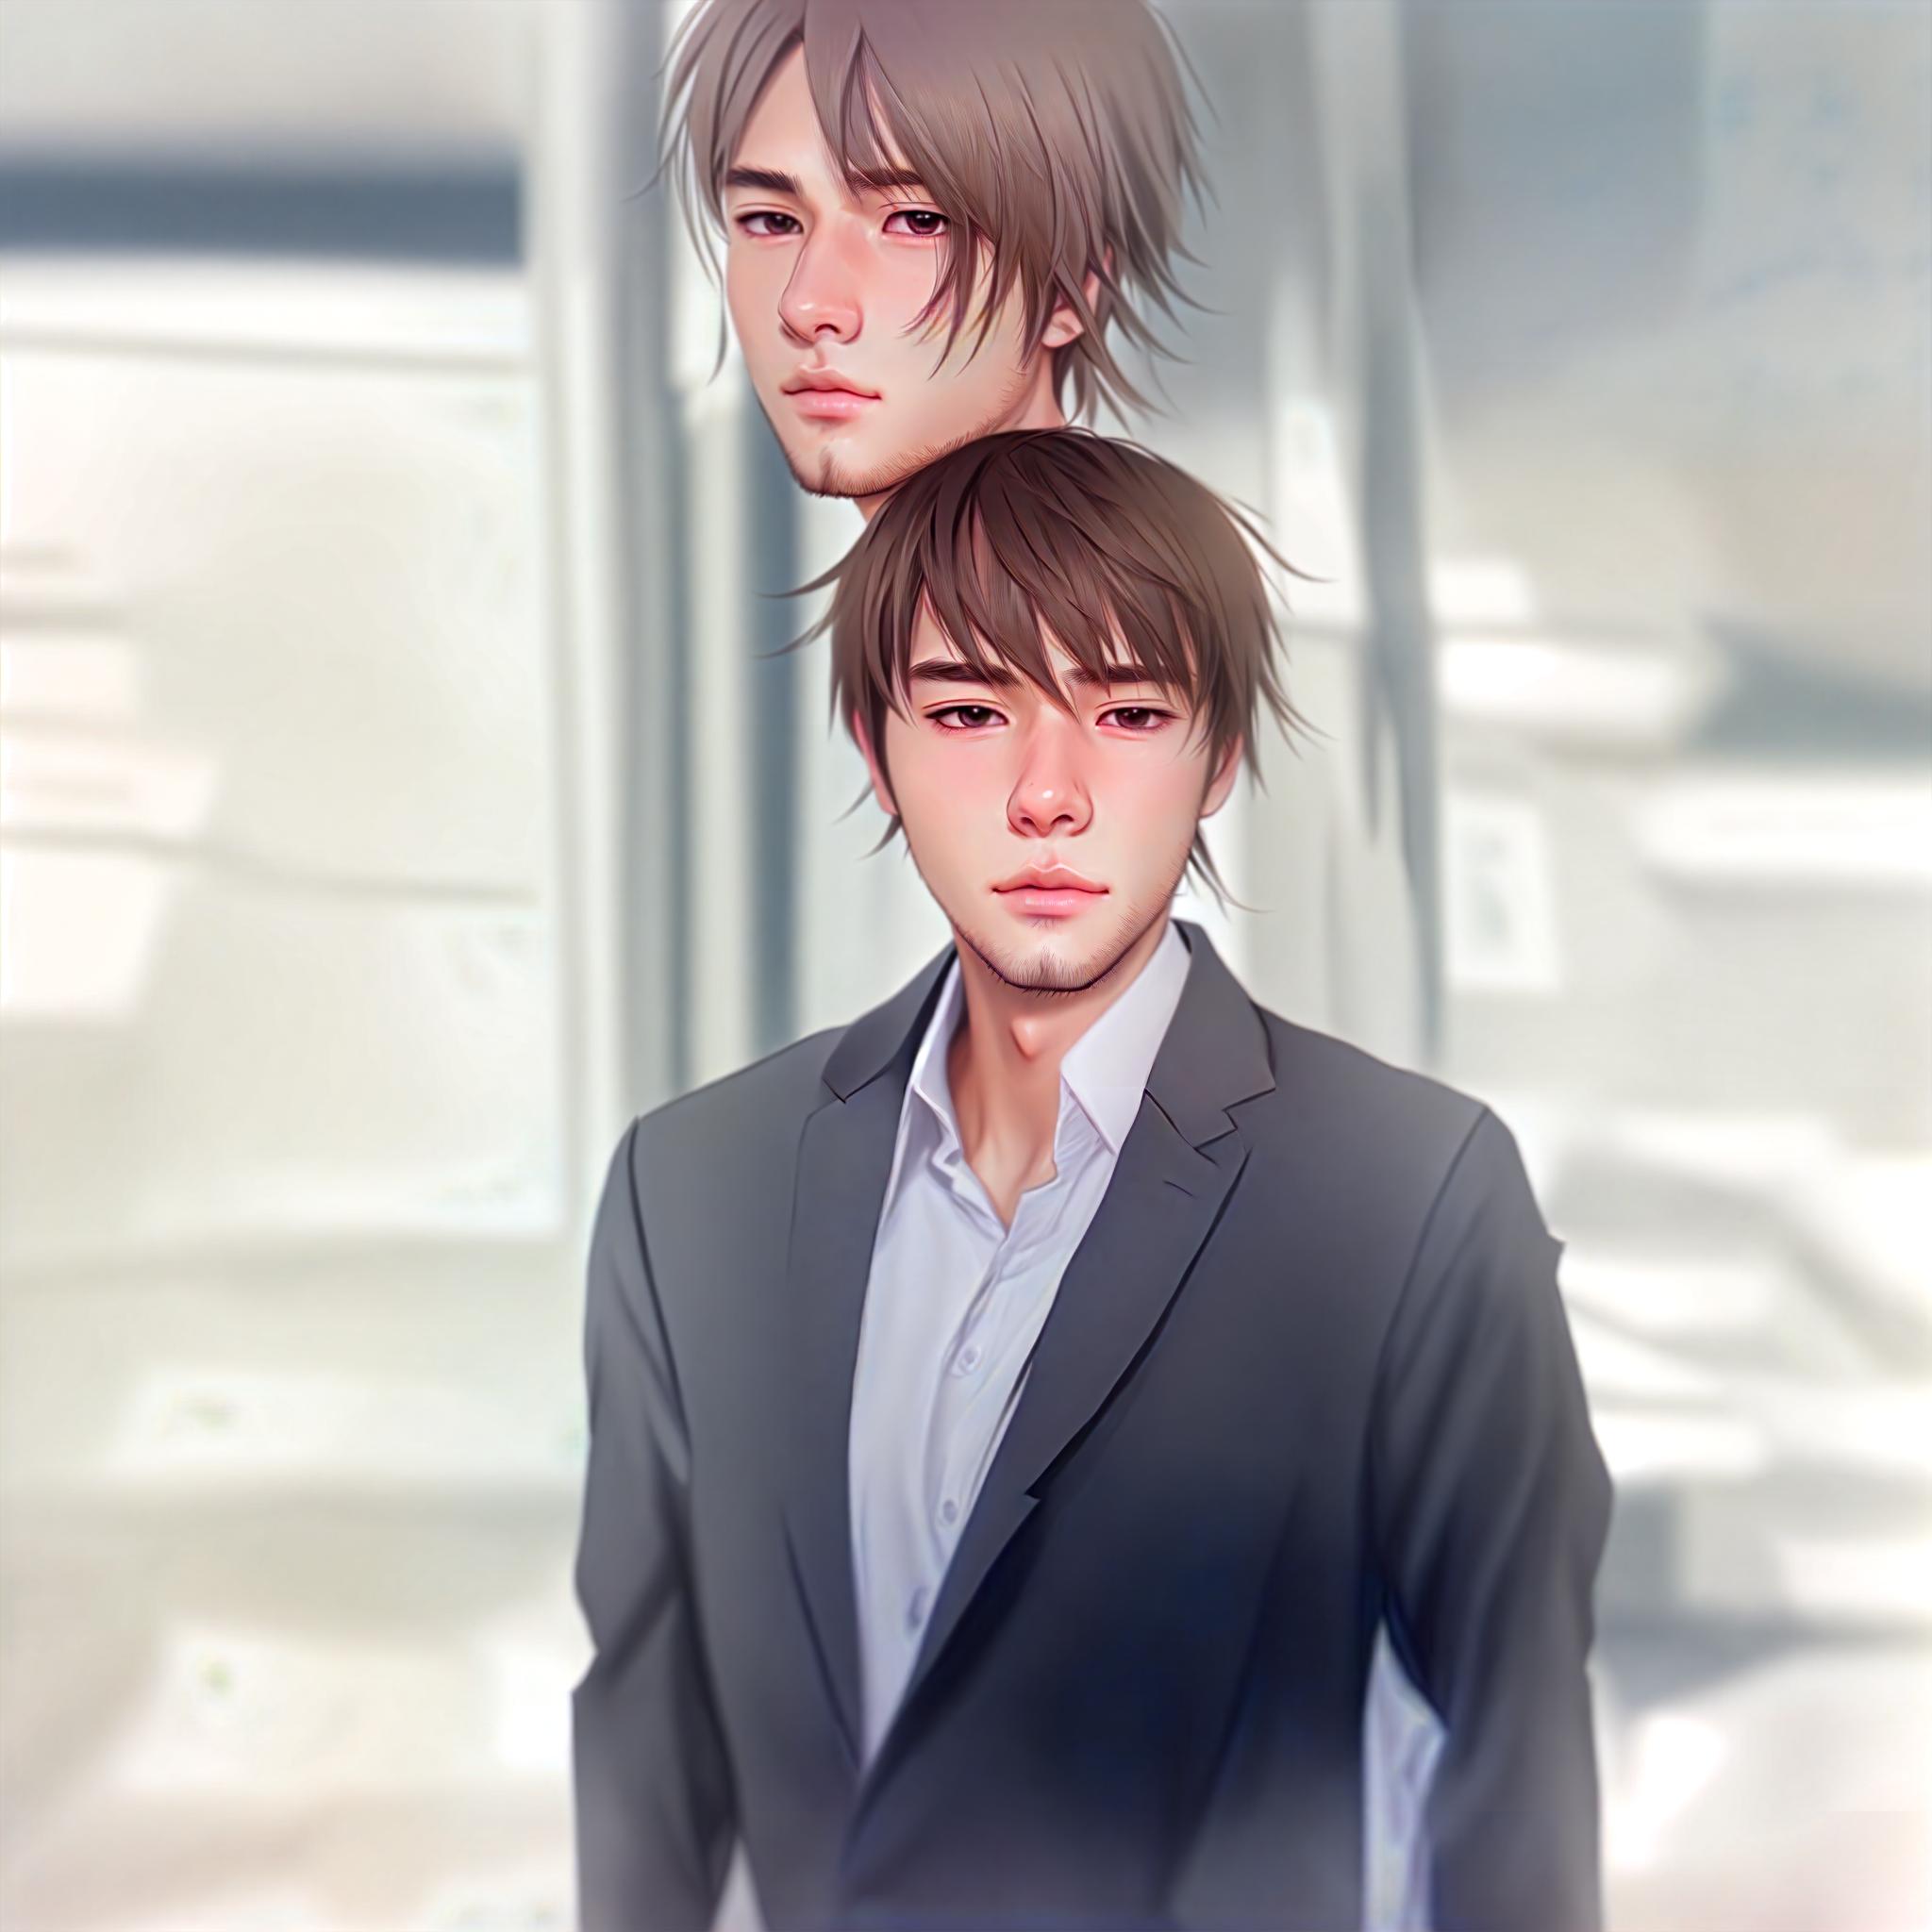  1men,(best quality:0.8), (best quality:0.8), perfect anime illustration,delicate face